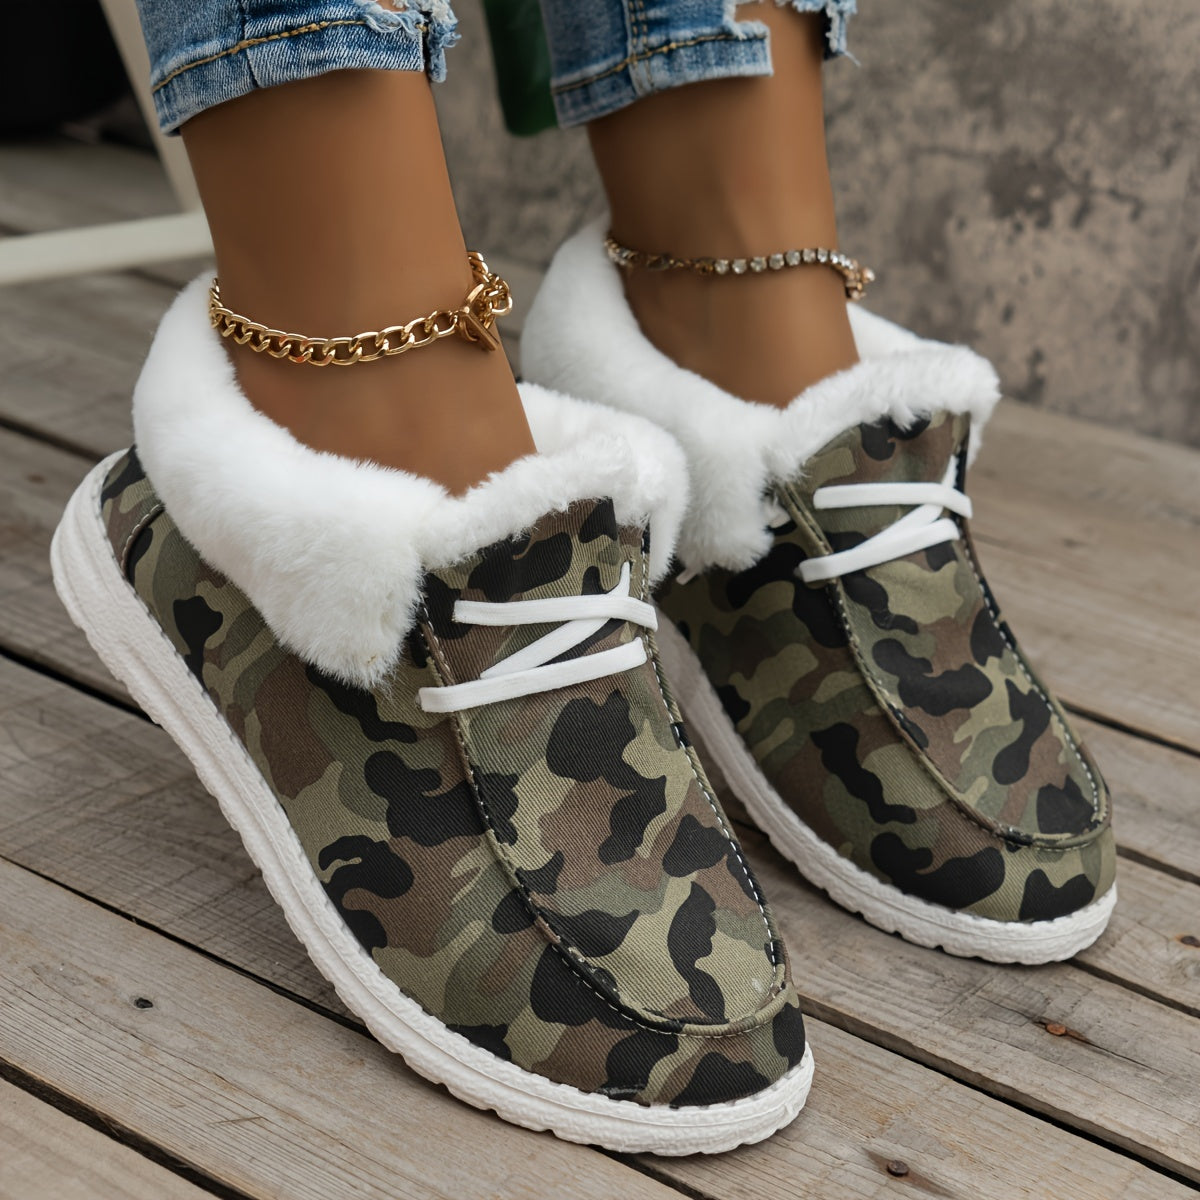 Women's Fluffy Fleece Lined Canvas Shoes, Thermal Slip On Low Top Shoes, Winter Warm Flat Shoes